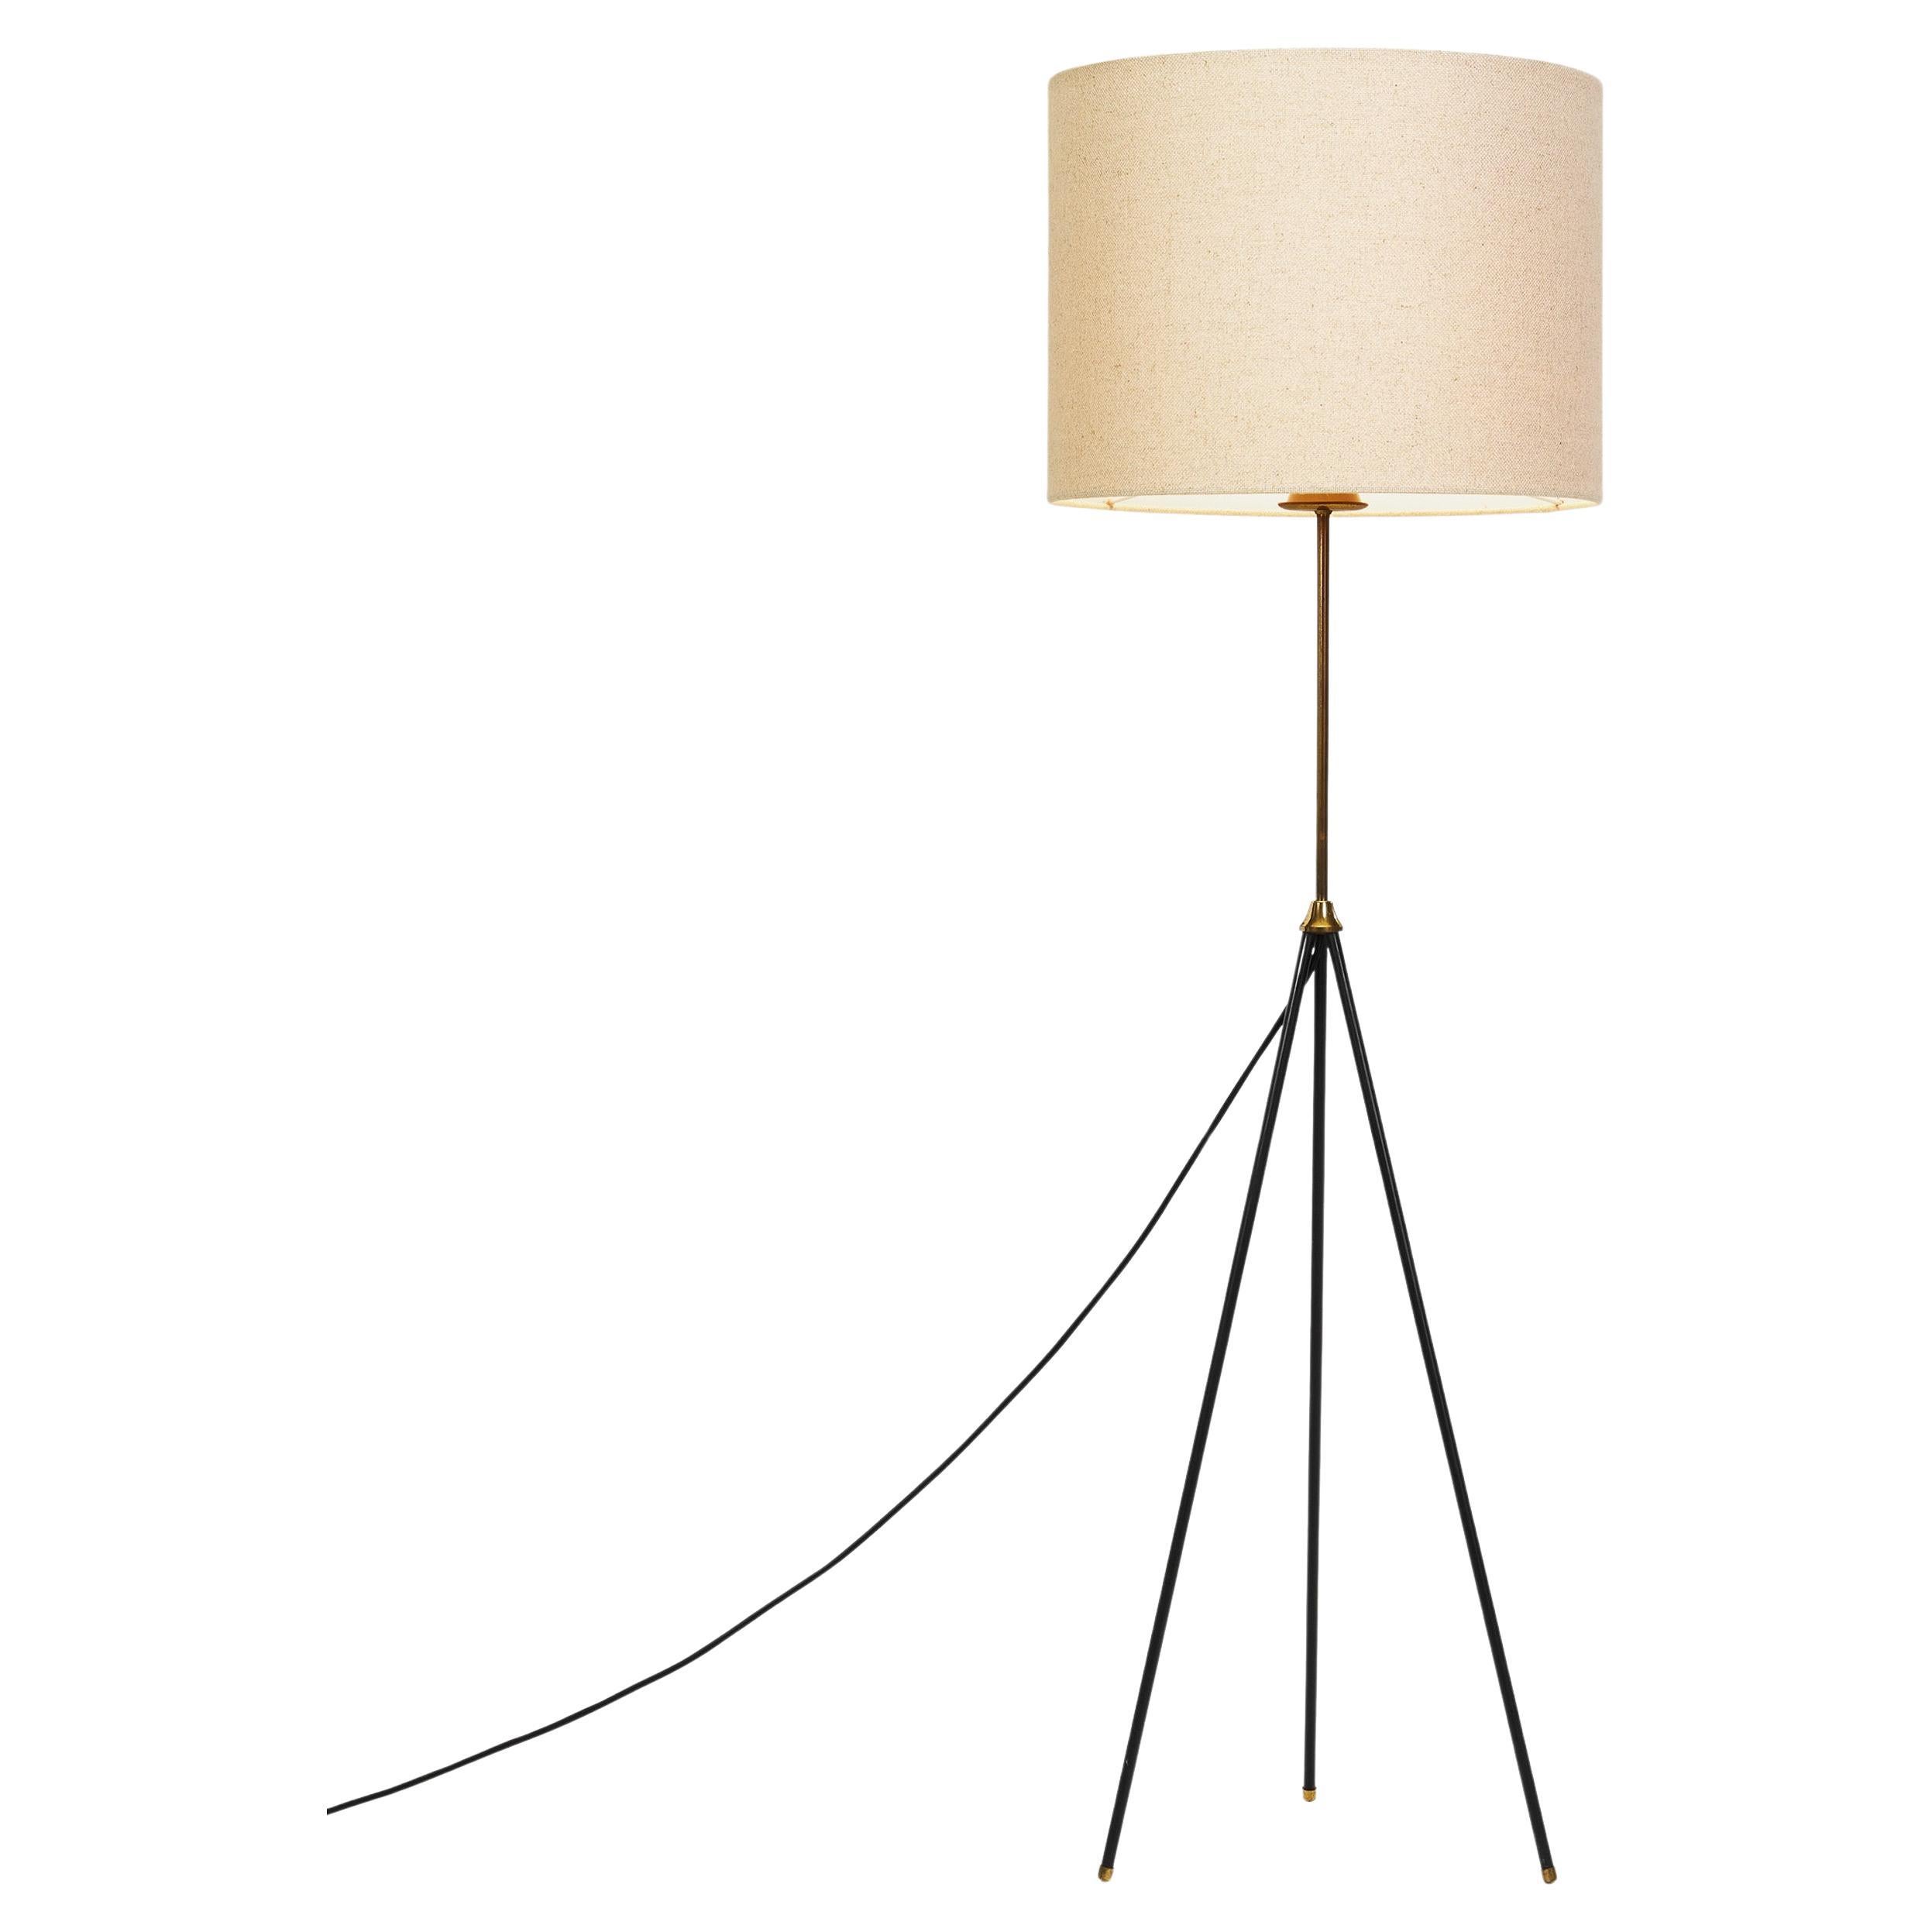 Mid-Century Modern Iron and Brass Tripod Floor Lamp, Europe 1950s For Sale